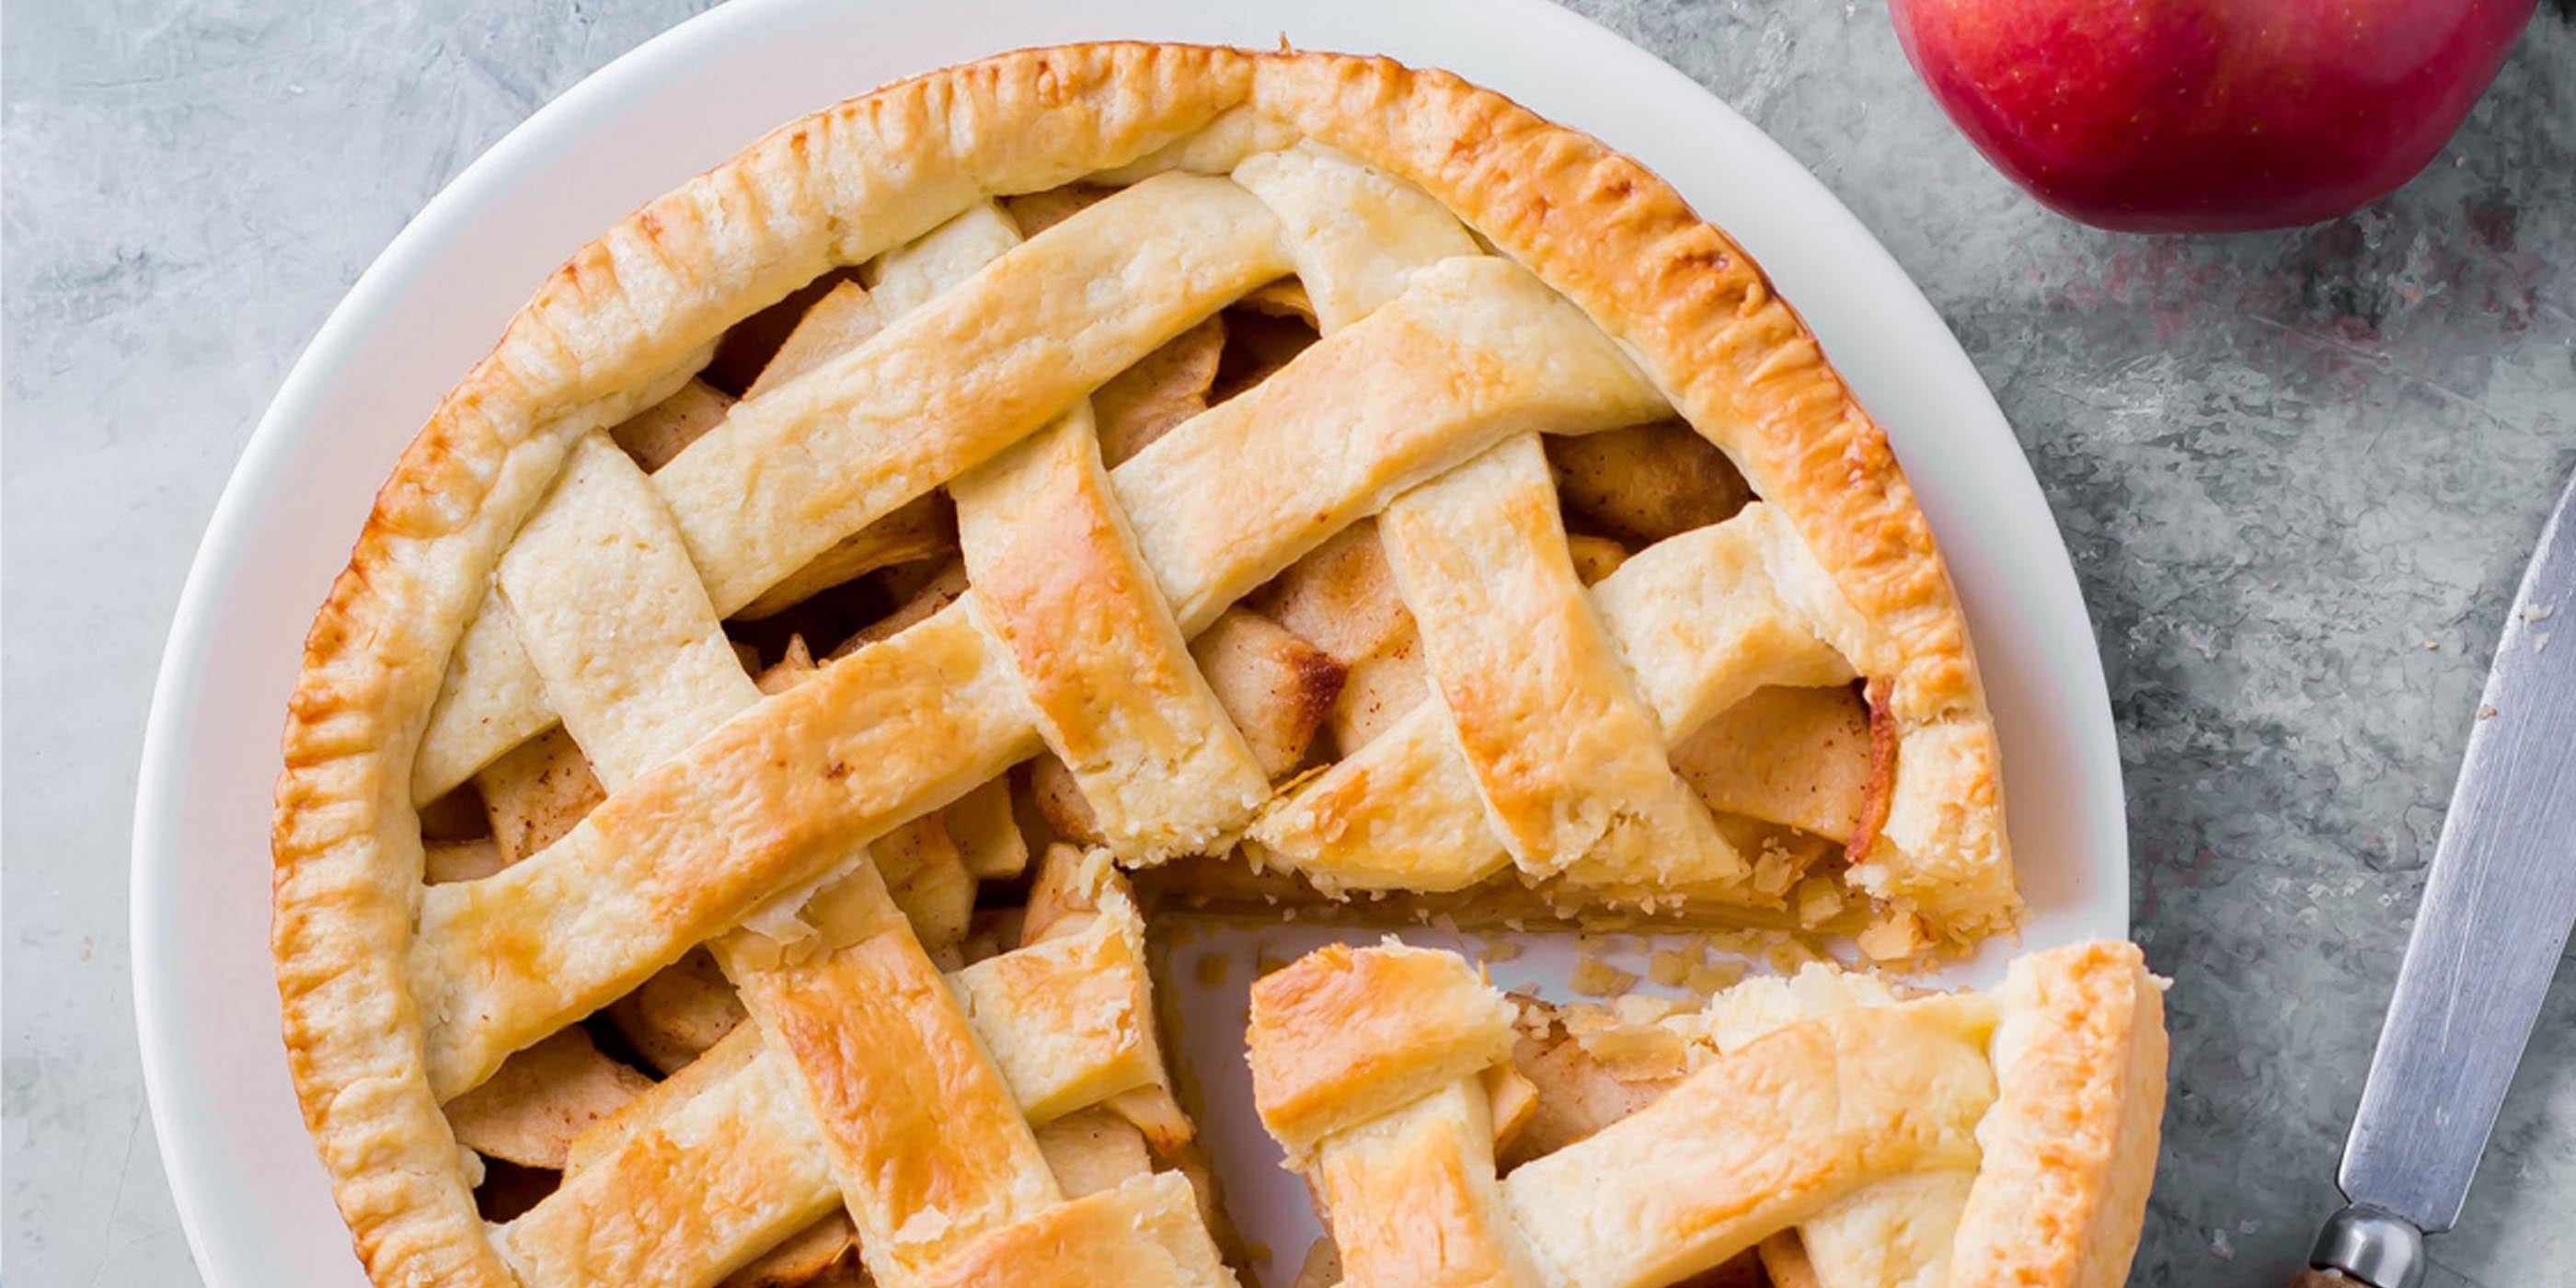 Old Fashioned Apple Pie